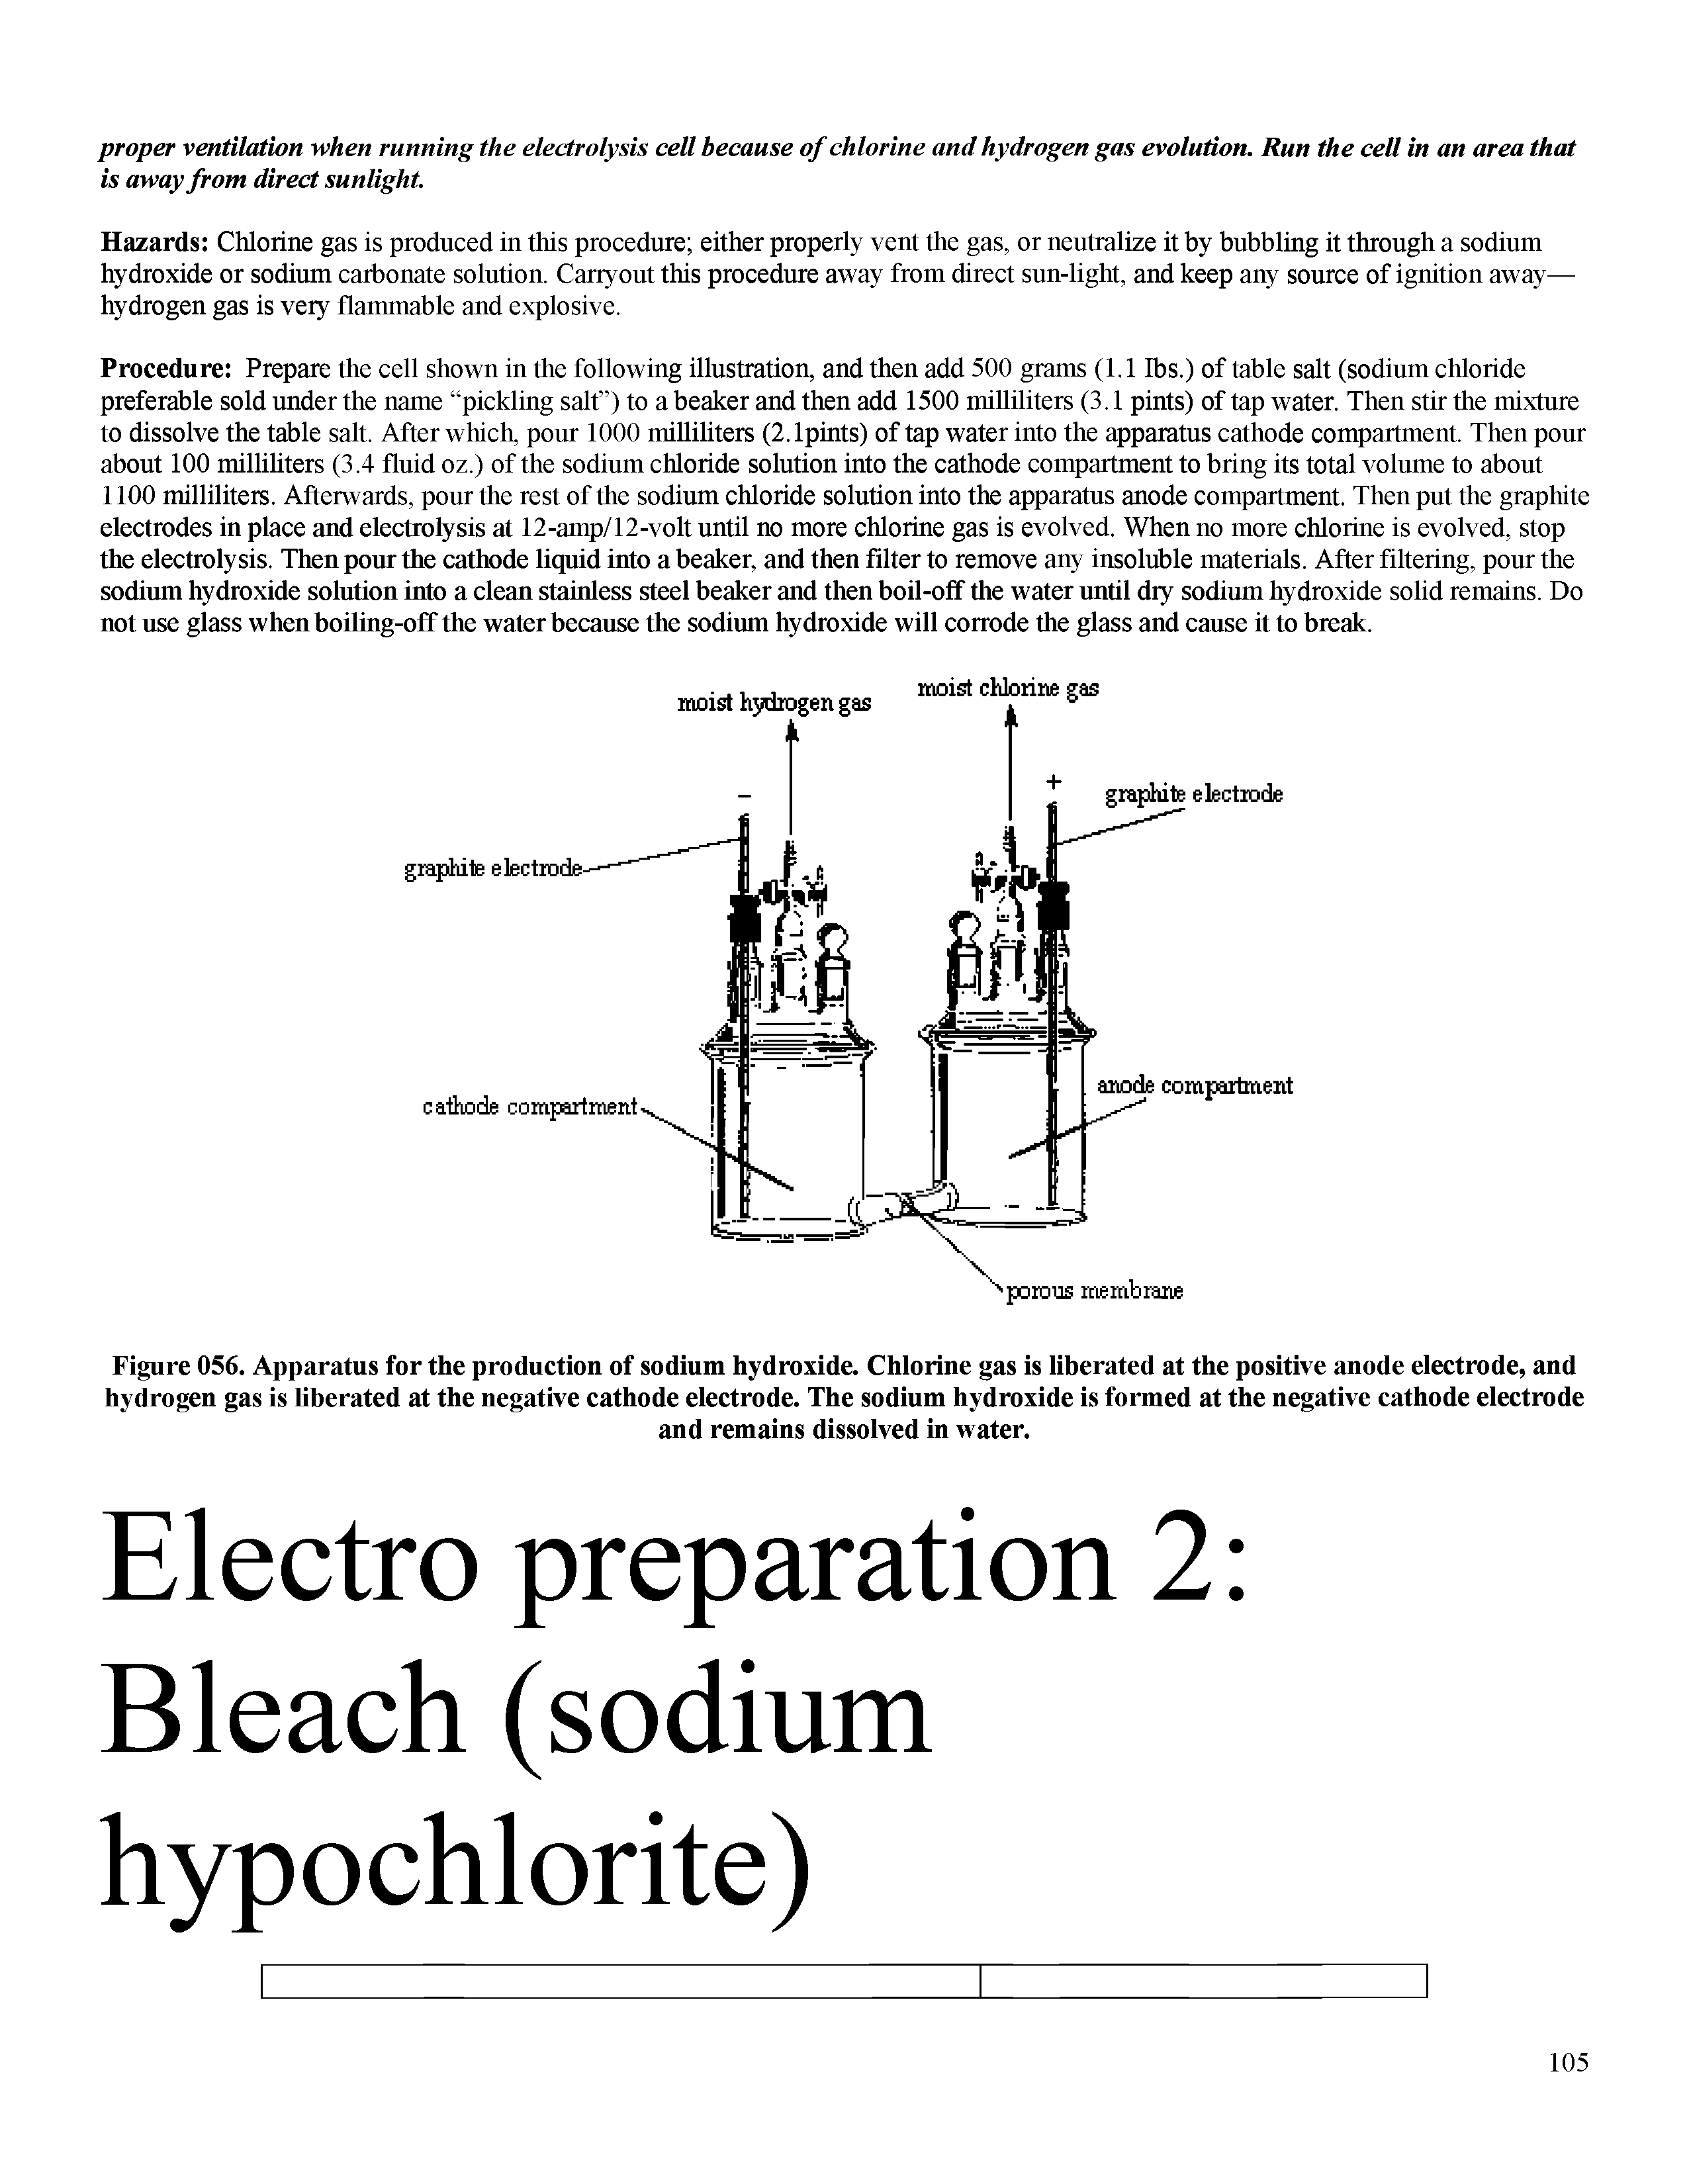 Figure 056. Apparatus for the production of sodium hydroxide. Chlorine gas is liberated at the positive anode electrode, and hydrogen gas is liberated at the negative cathode electrode. The sodium hydroxide is formed at the negative cathode electrode...